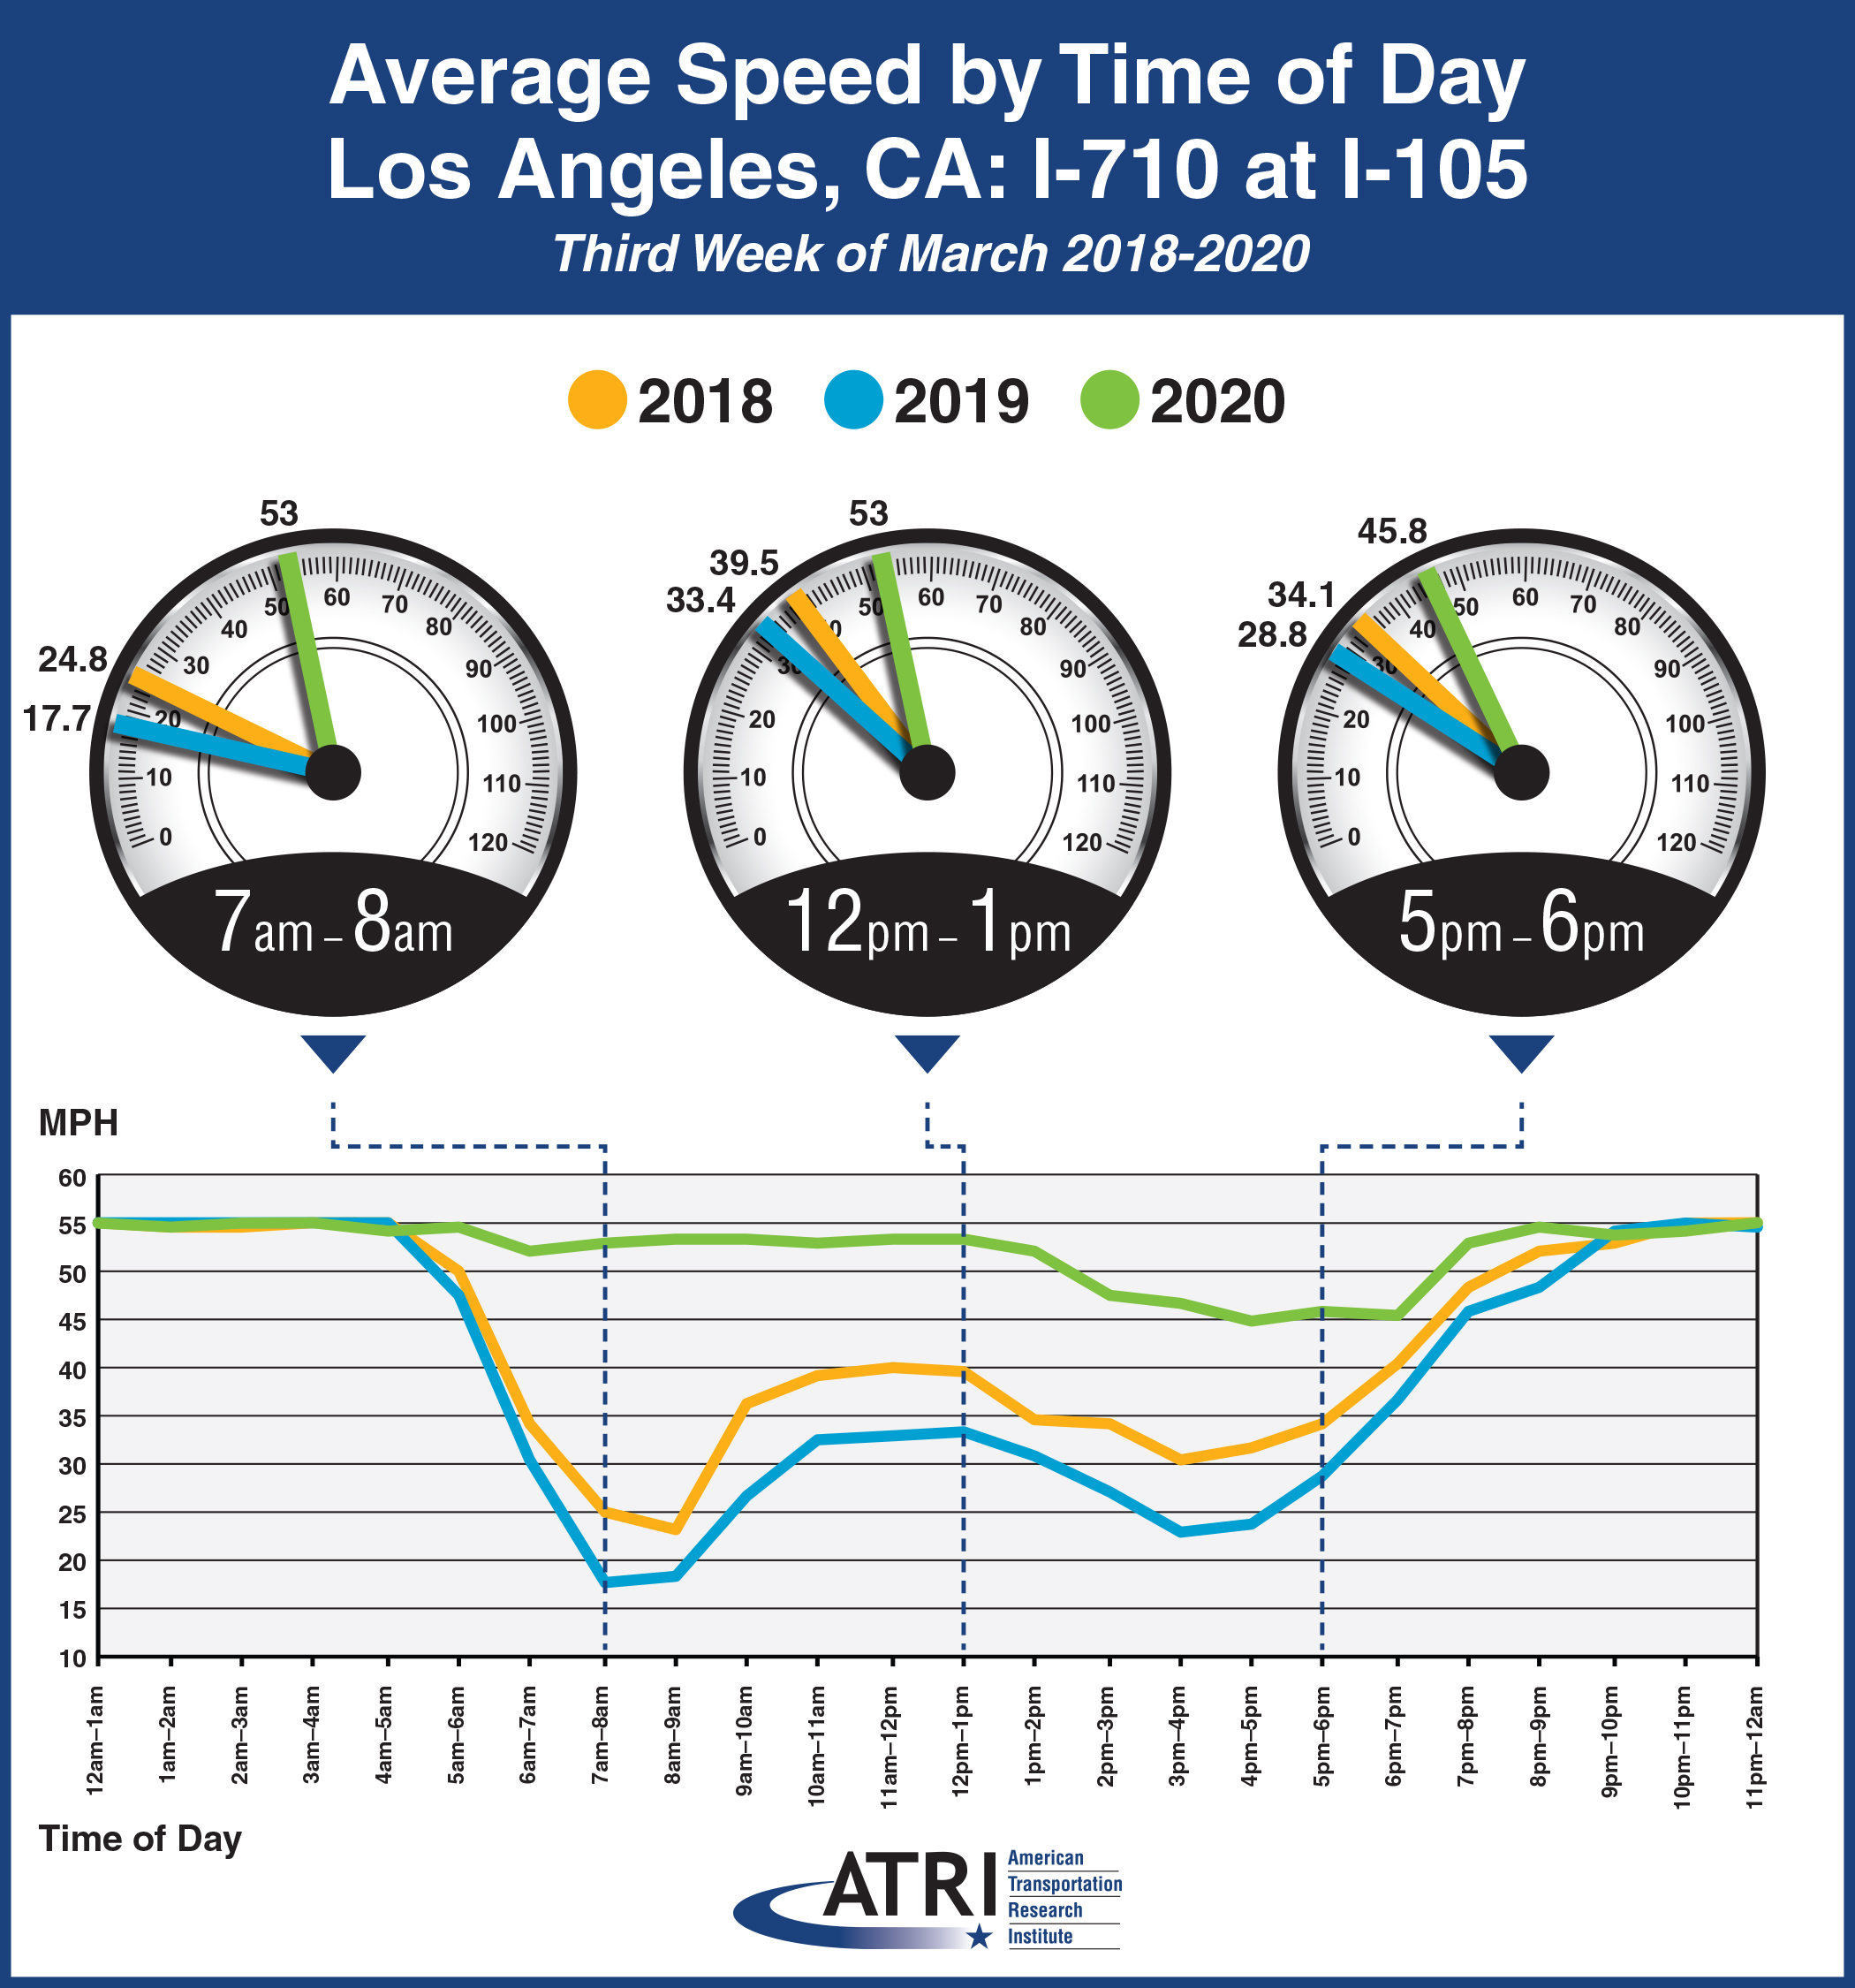 Avg Speed by Time of Day - Los Angeles, CA: I-710 at I-105